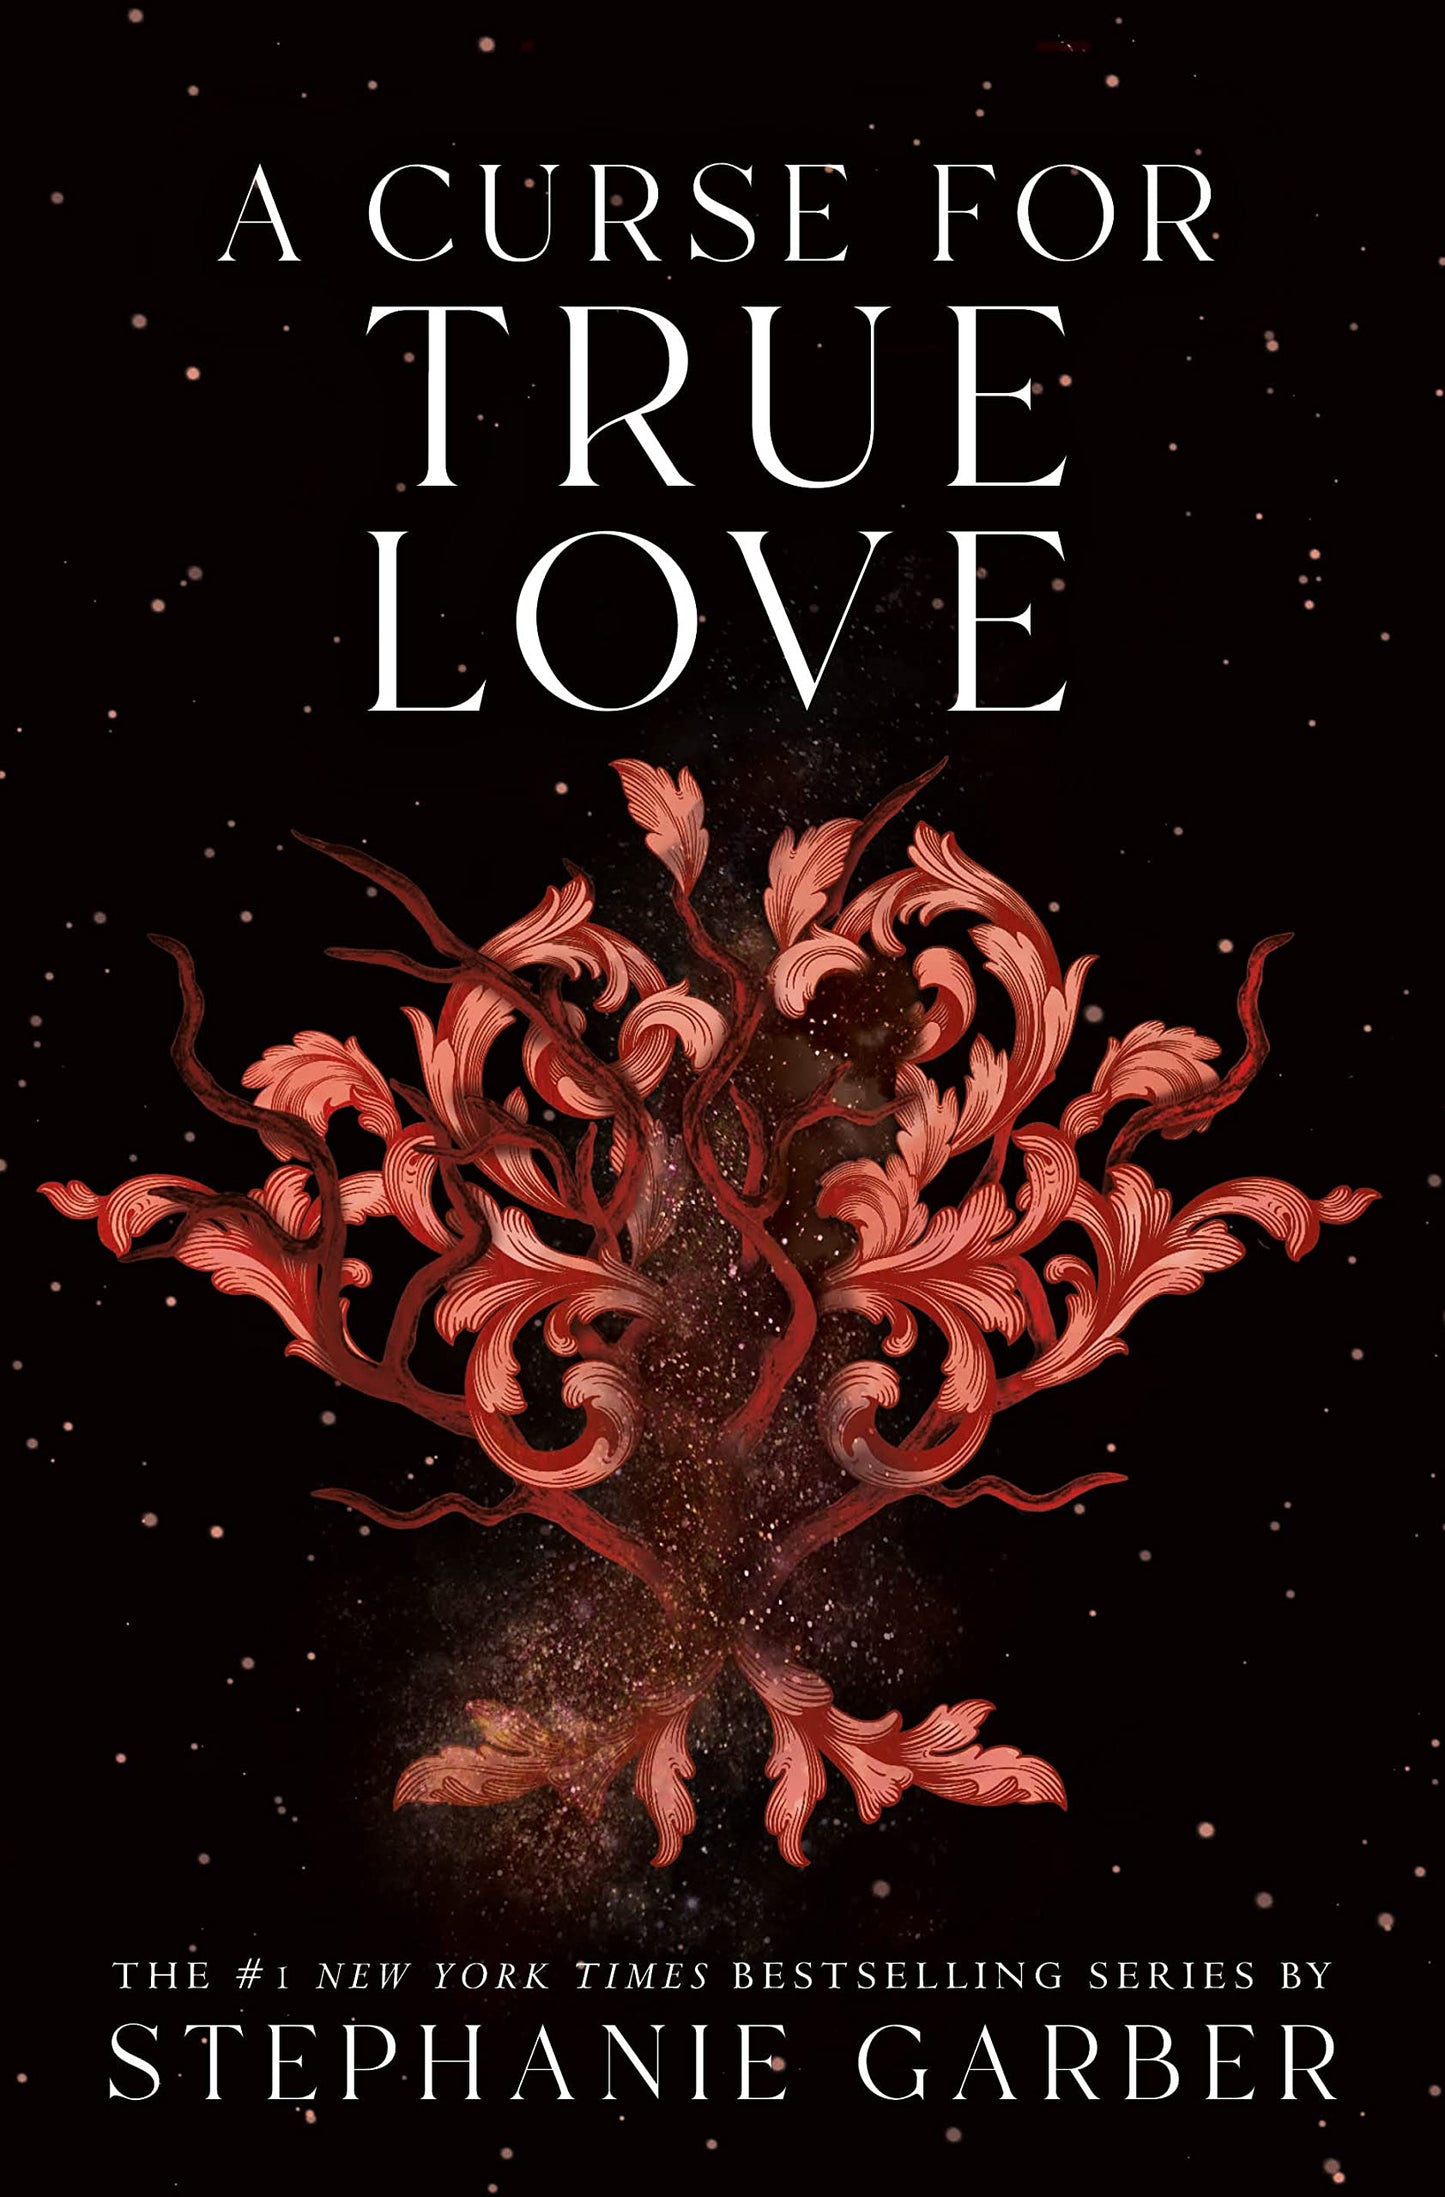 A Curse for True Love (Once Upon a Broken Heart #3) (Hardcover)